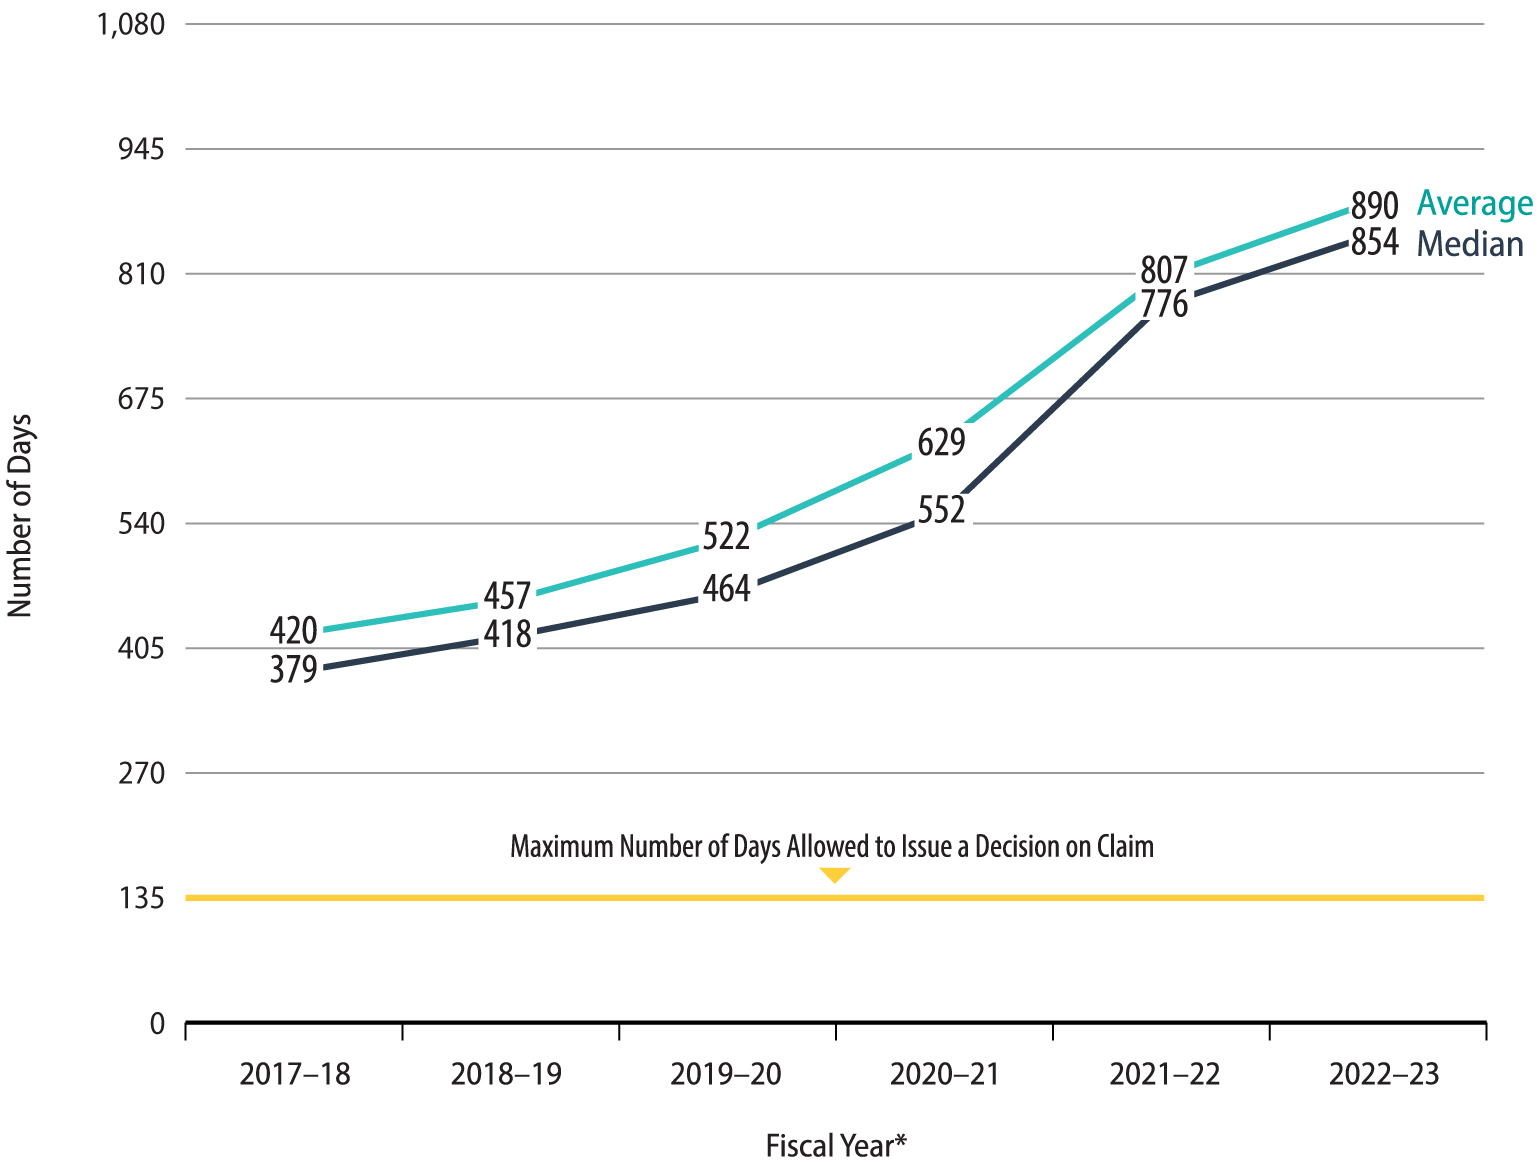 A line graph depicting an increase in the average and median number of days the Labor Commissioner’s Office takes to issue a decision on claims from fiscal year 2017-2018 to fiscal year 2022-2023. 